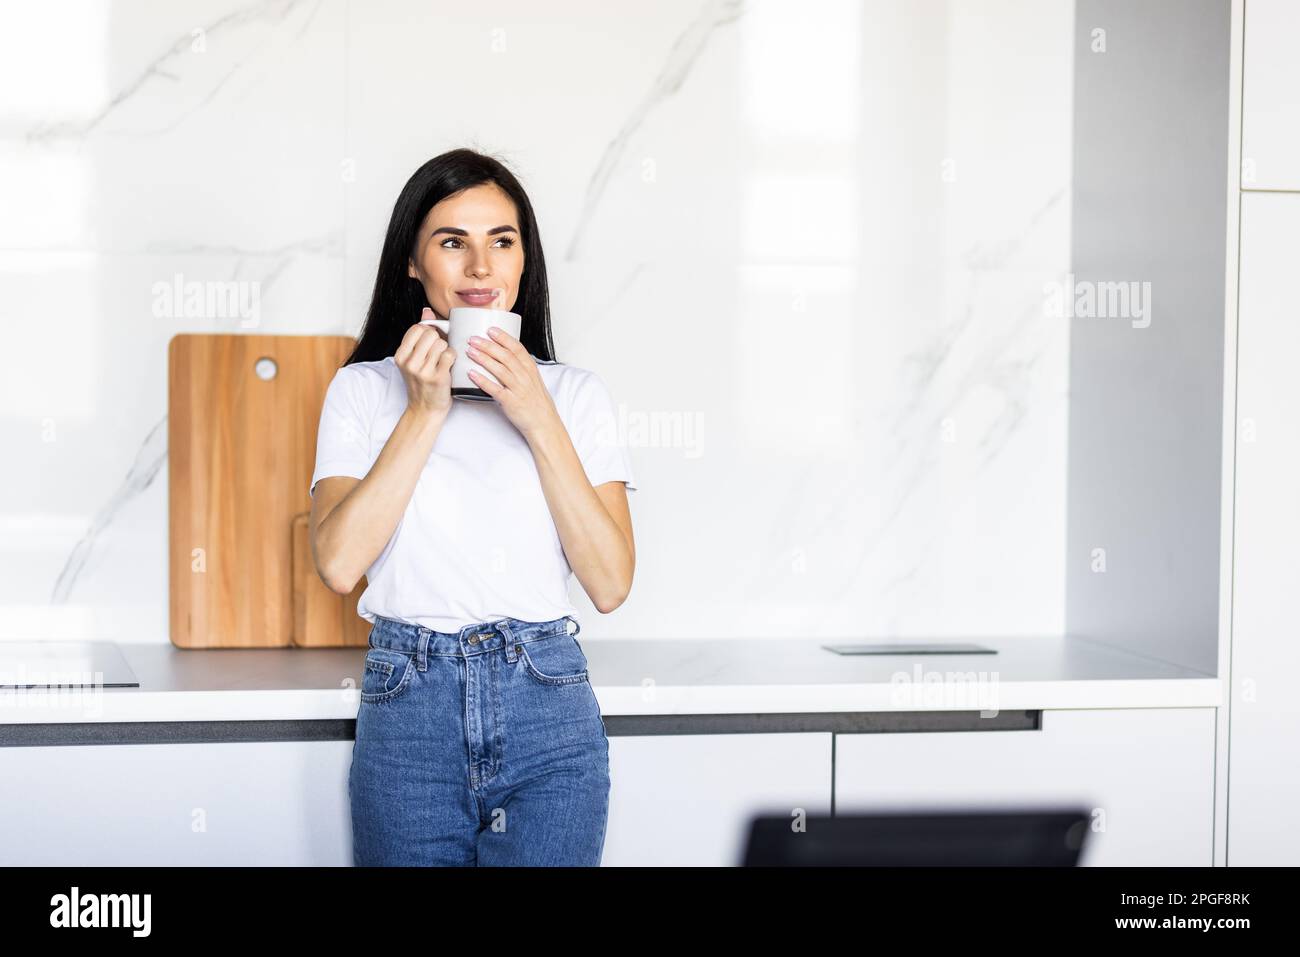 Positive caucasian woman drinking coffee and using digital tablet, surfing internet online, sitting at table in kitchen. Excited lady checking social Stock Photo